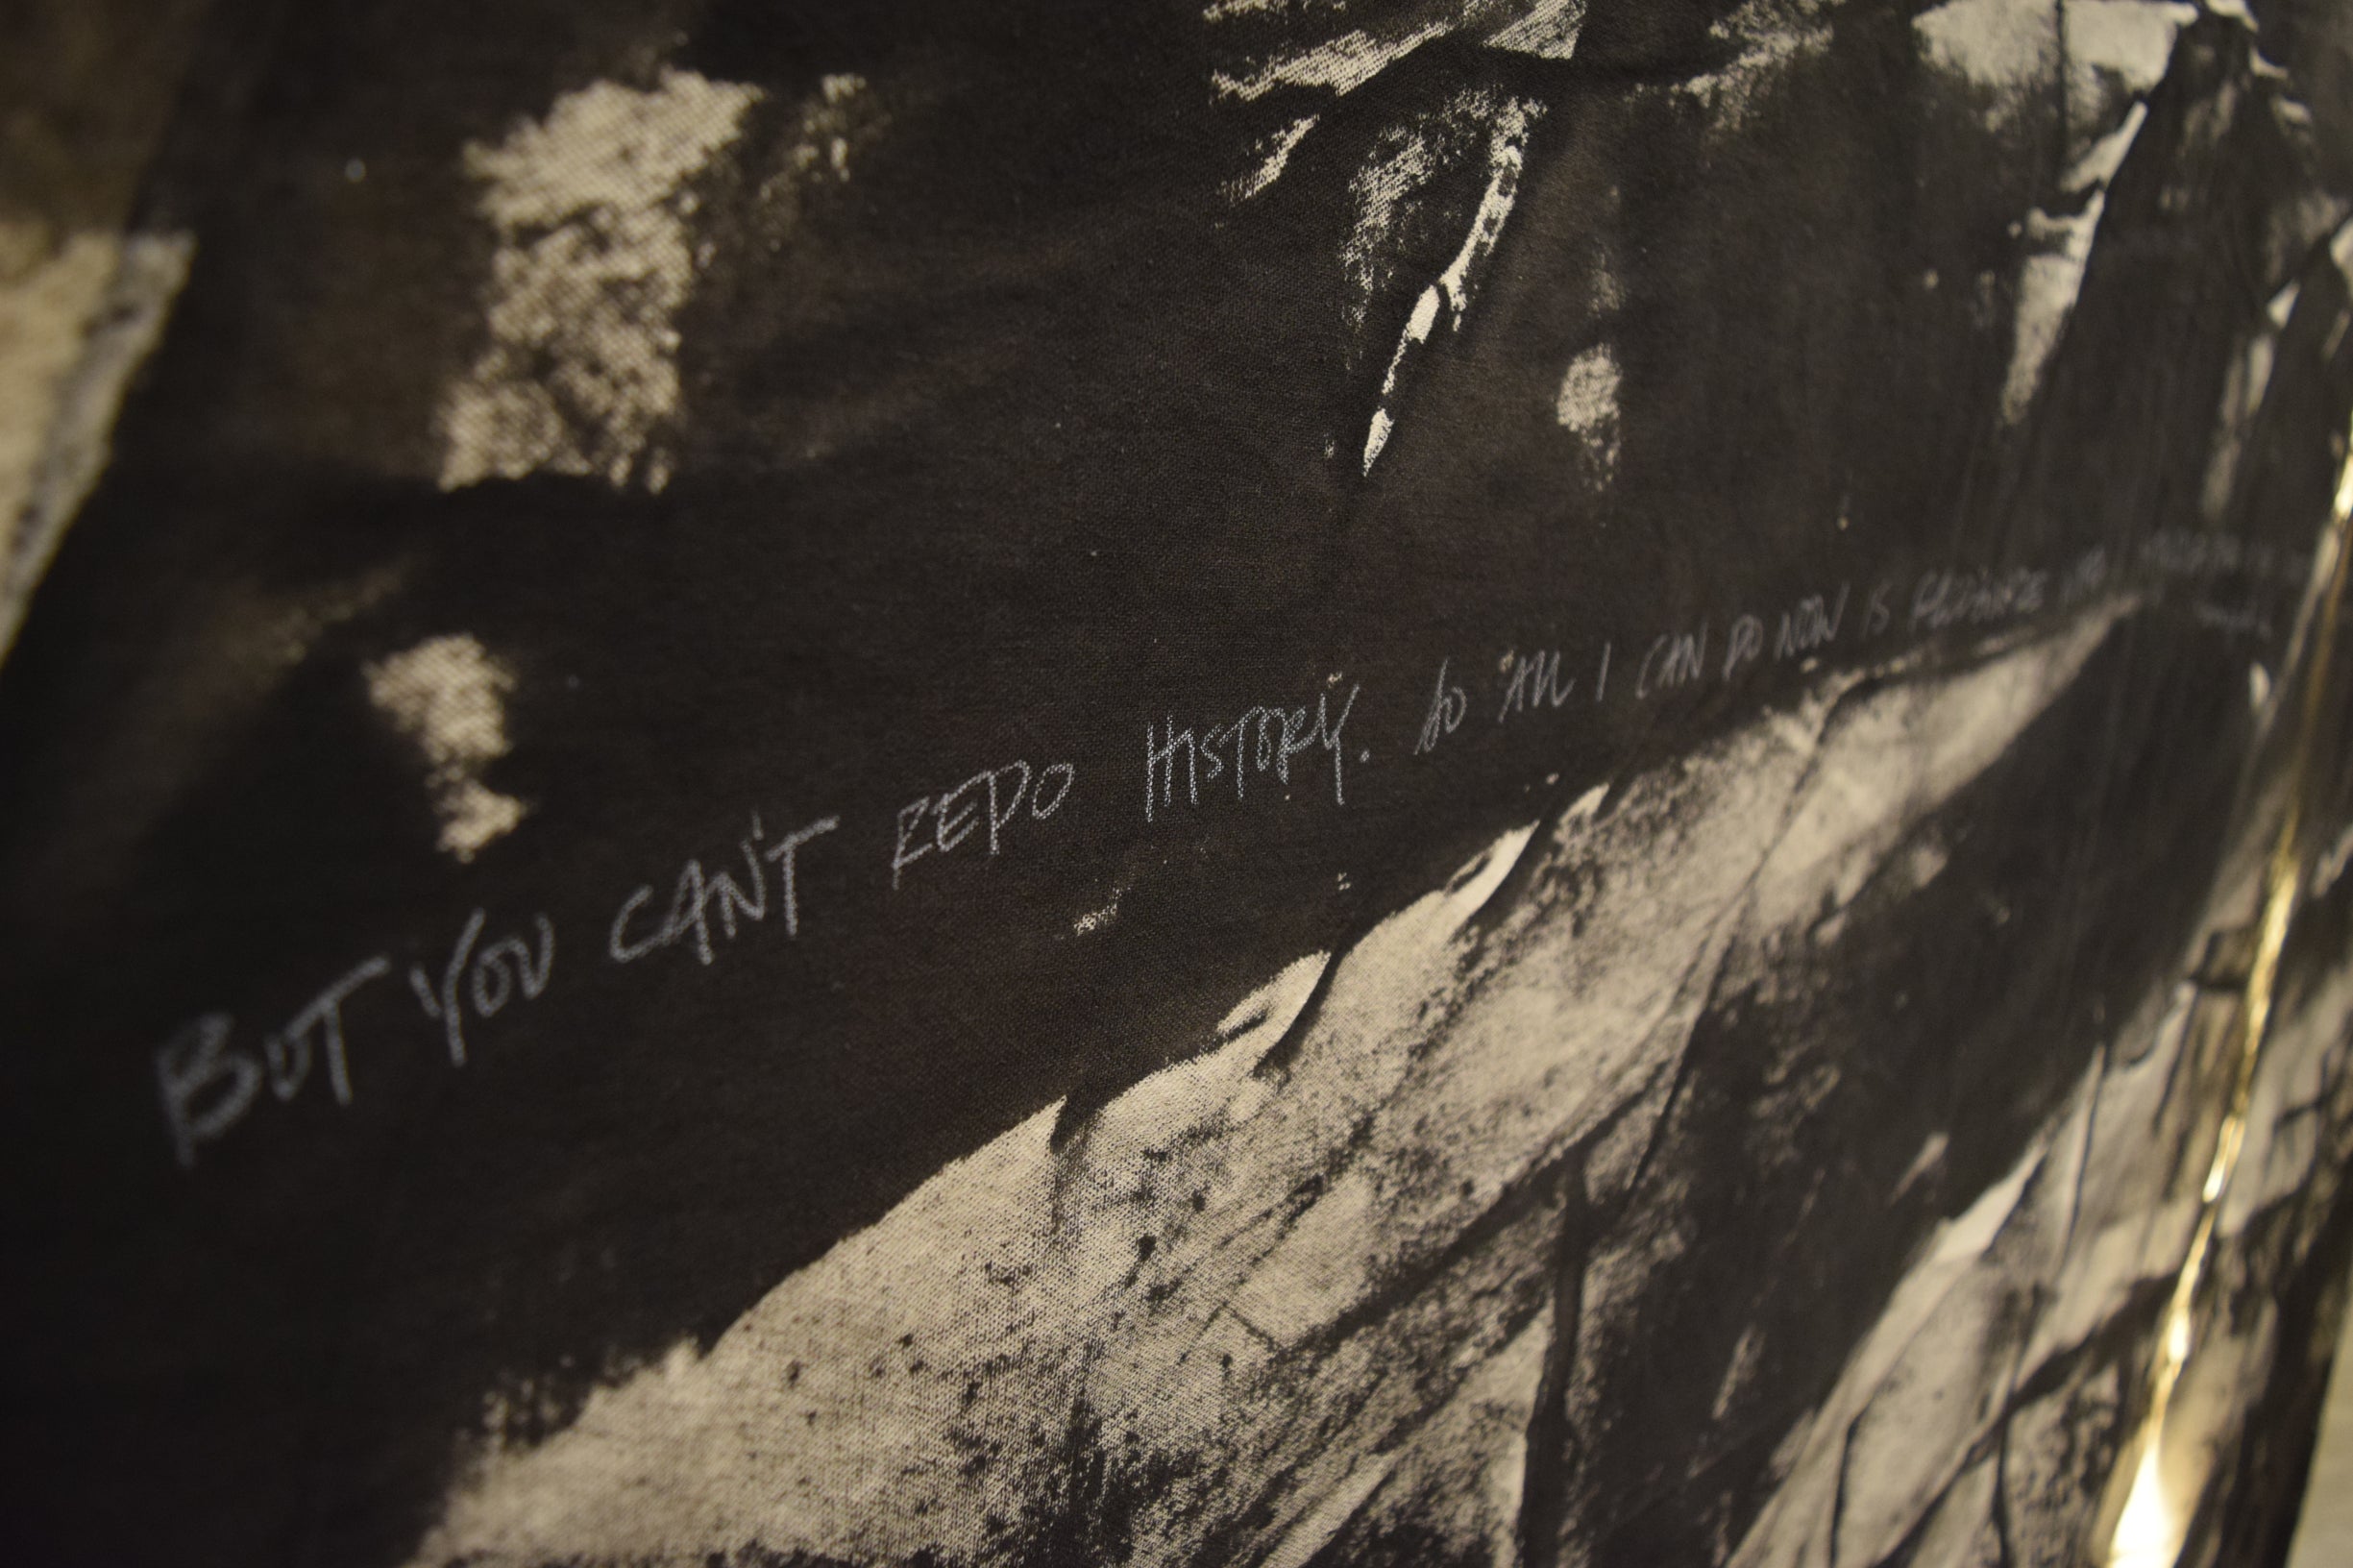 "But you can't redo history..." written in white chalk over black paint on canvas